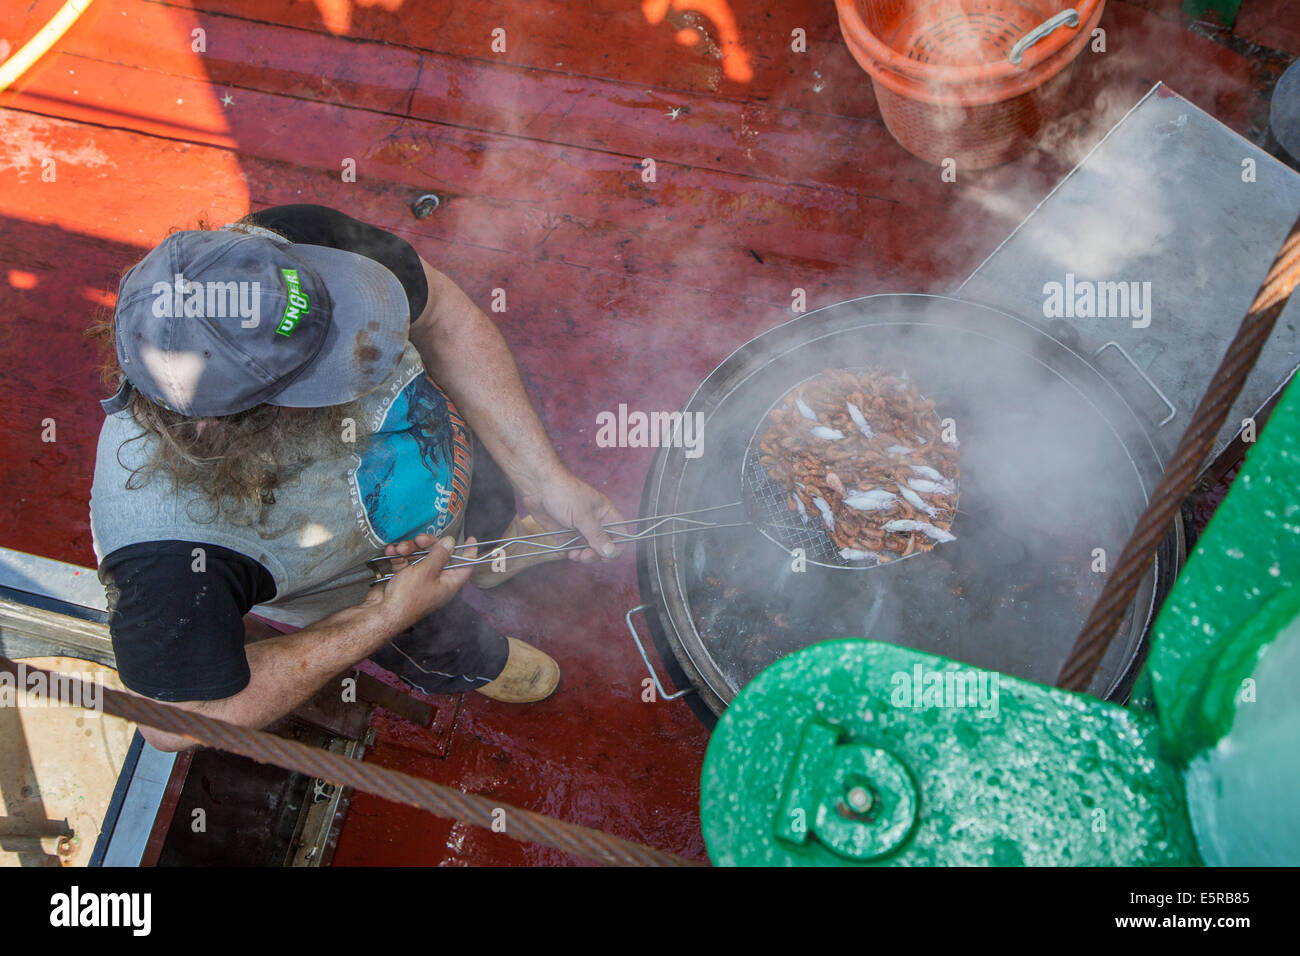 Fisherman boiling shrimps on board of shrimp boat fishing for shrimps on the North Sea Stock Photo